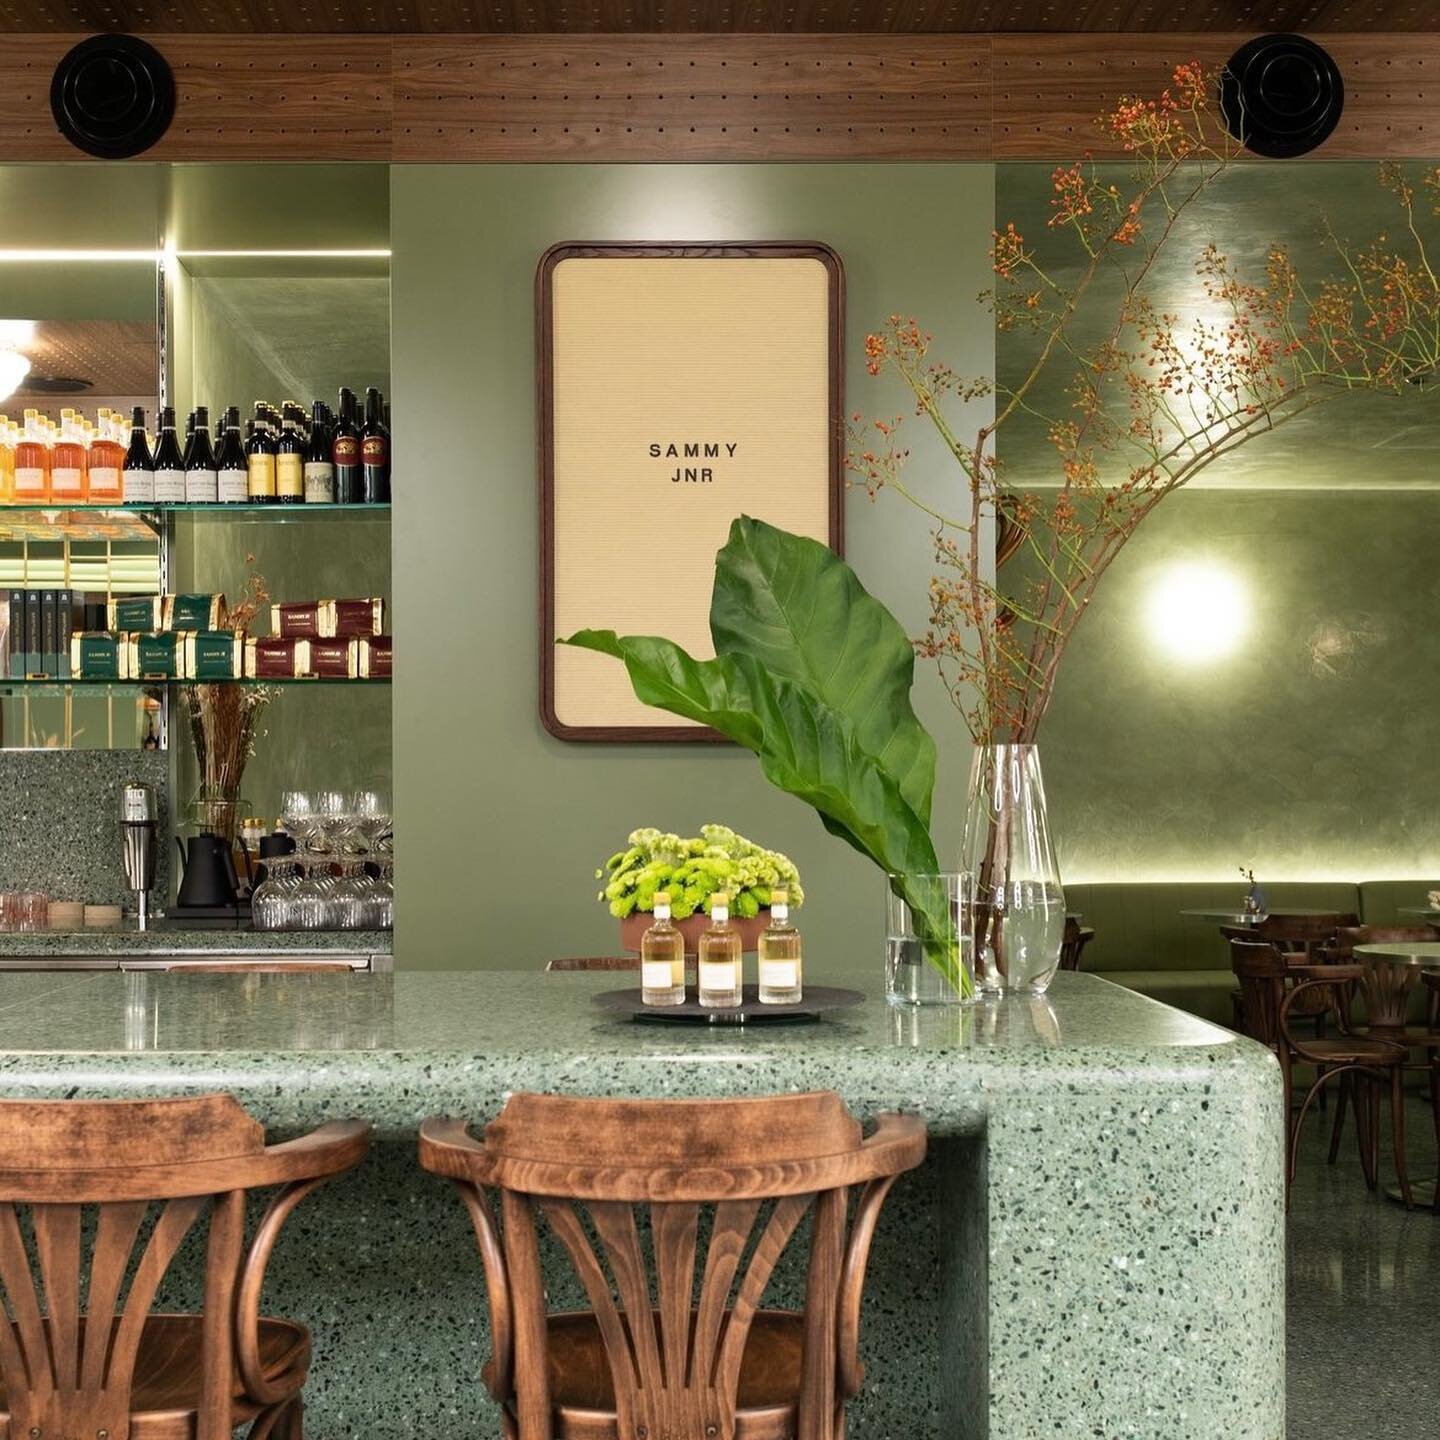 // FEATURE // Looking forward to starting a new project next week with @mobiusbuild and #georgelivissianis in the heart of Potts Point. Here&rsquo;s an example of their beautiful design and build work @sammy_junior_sydney
That bar !! 😍
💚🤍💚
.
.
.
